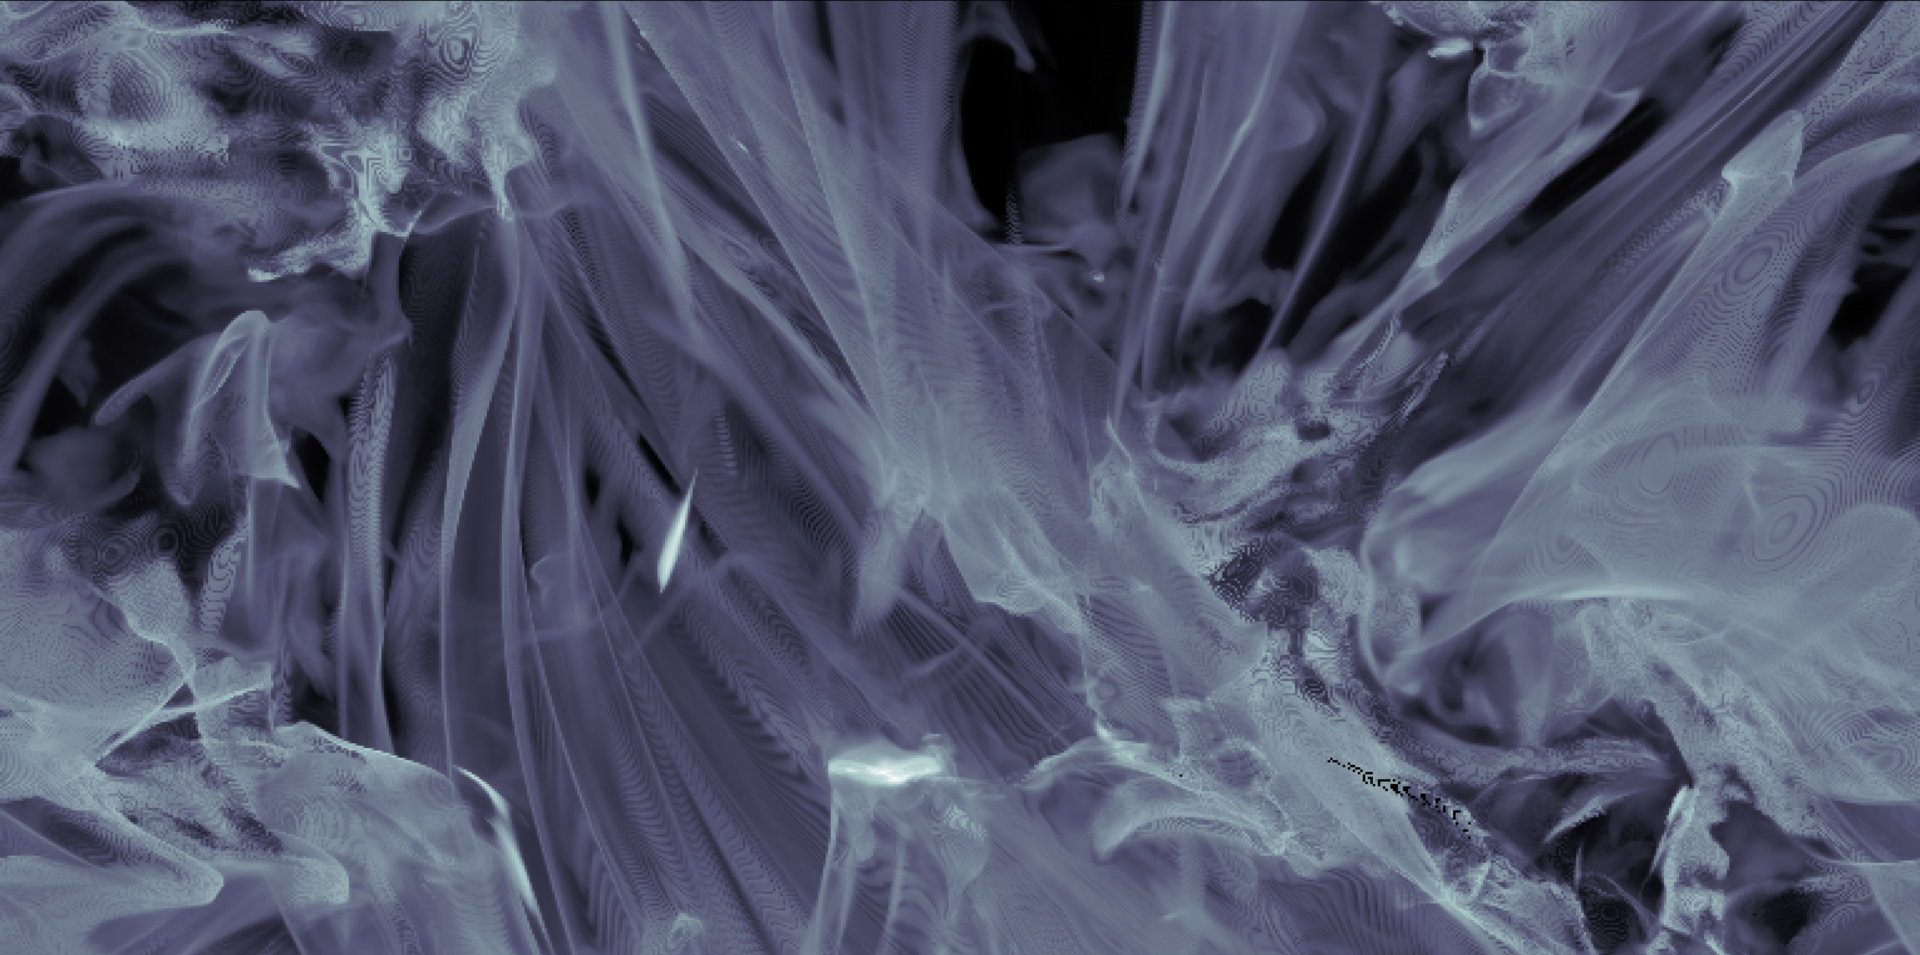 image contains grey, blue smokes simulating accelerated electrons